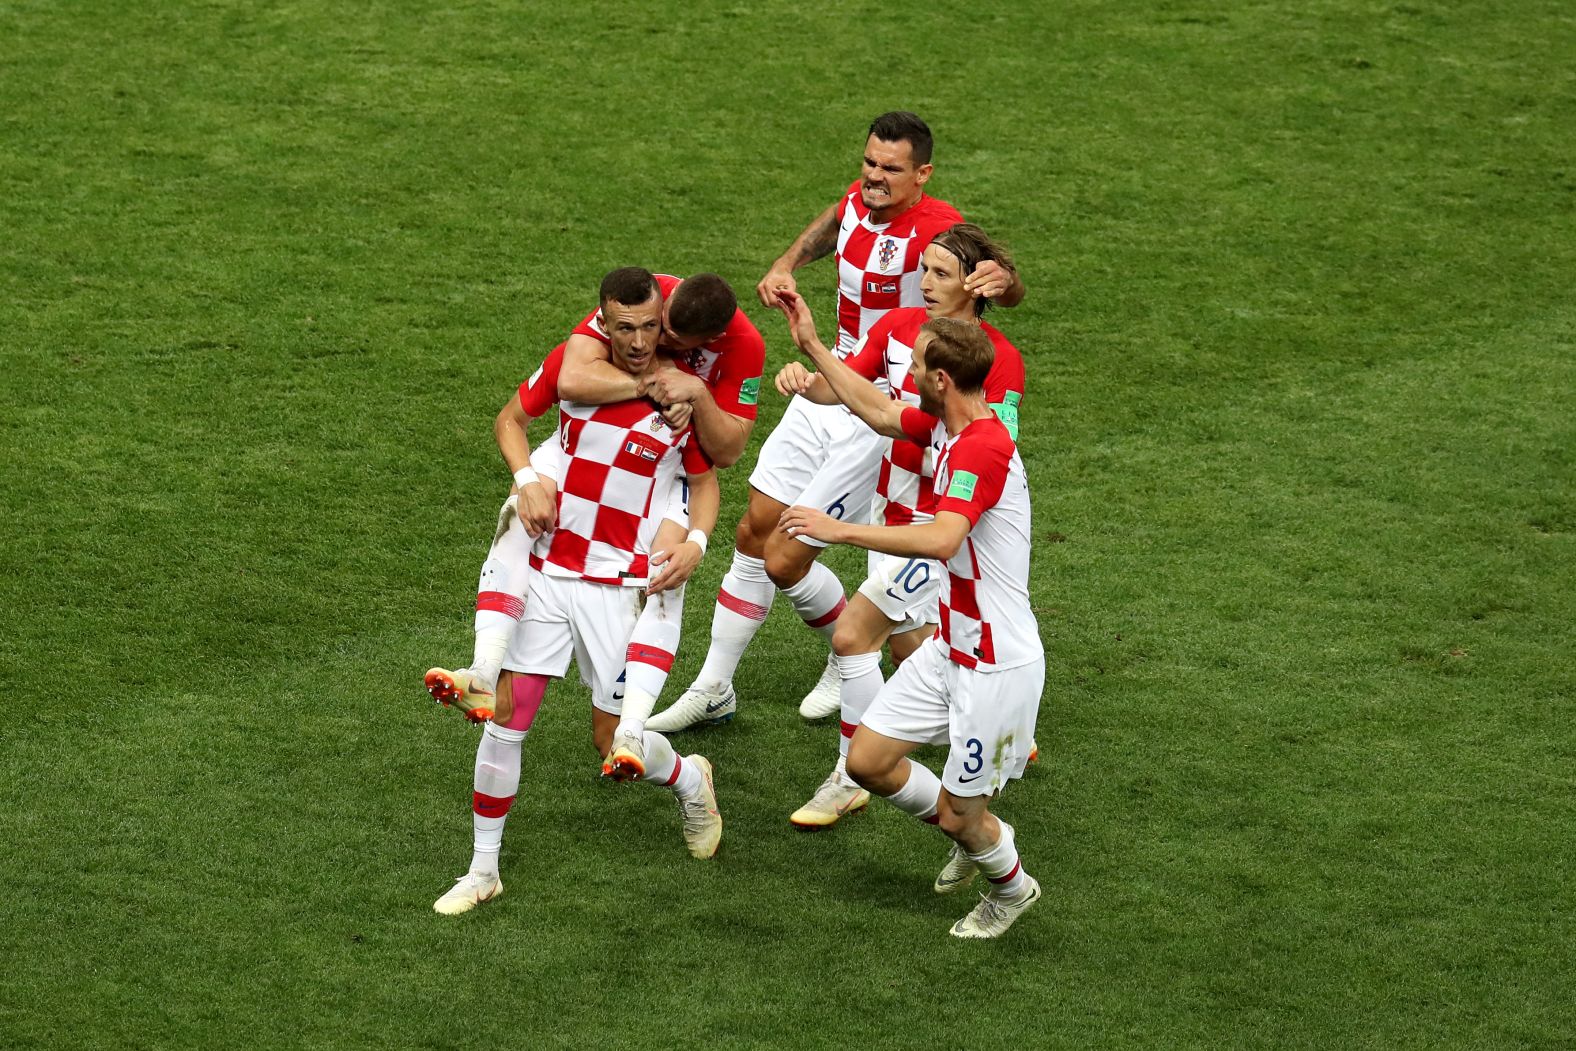 Perisic, bottom left, scored a spectacular first-half goal to tie the match at 1-1.